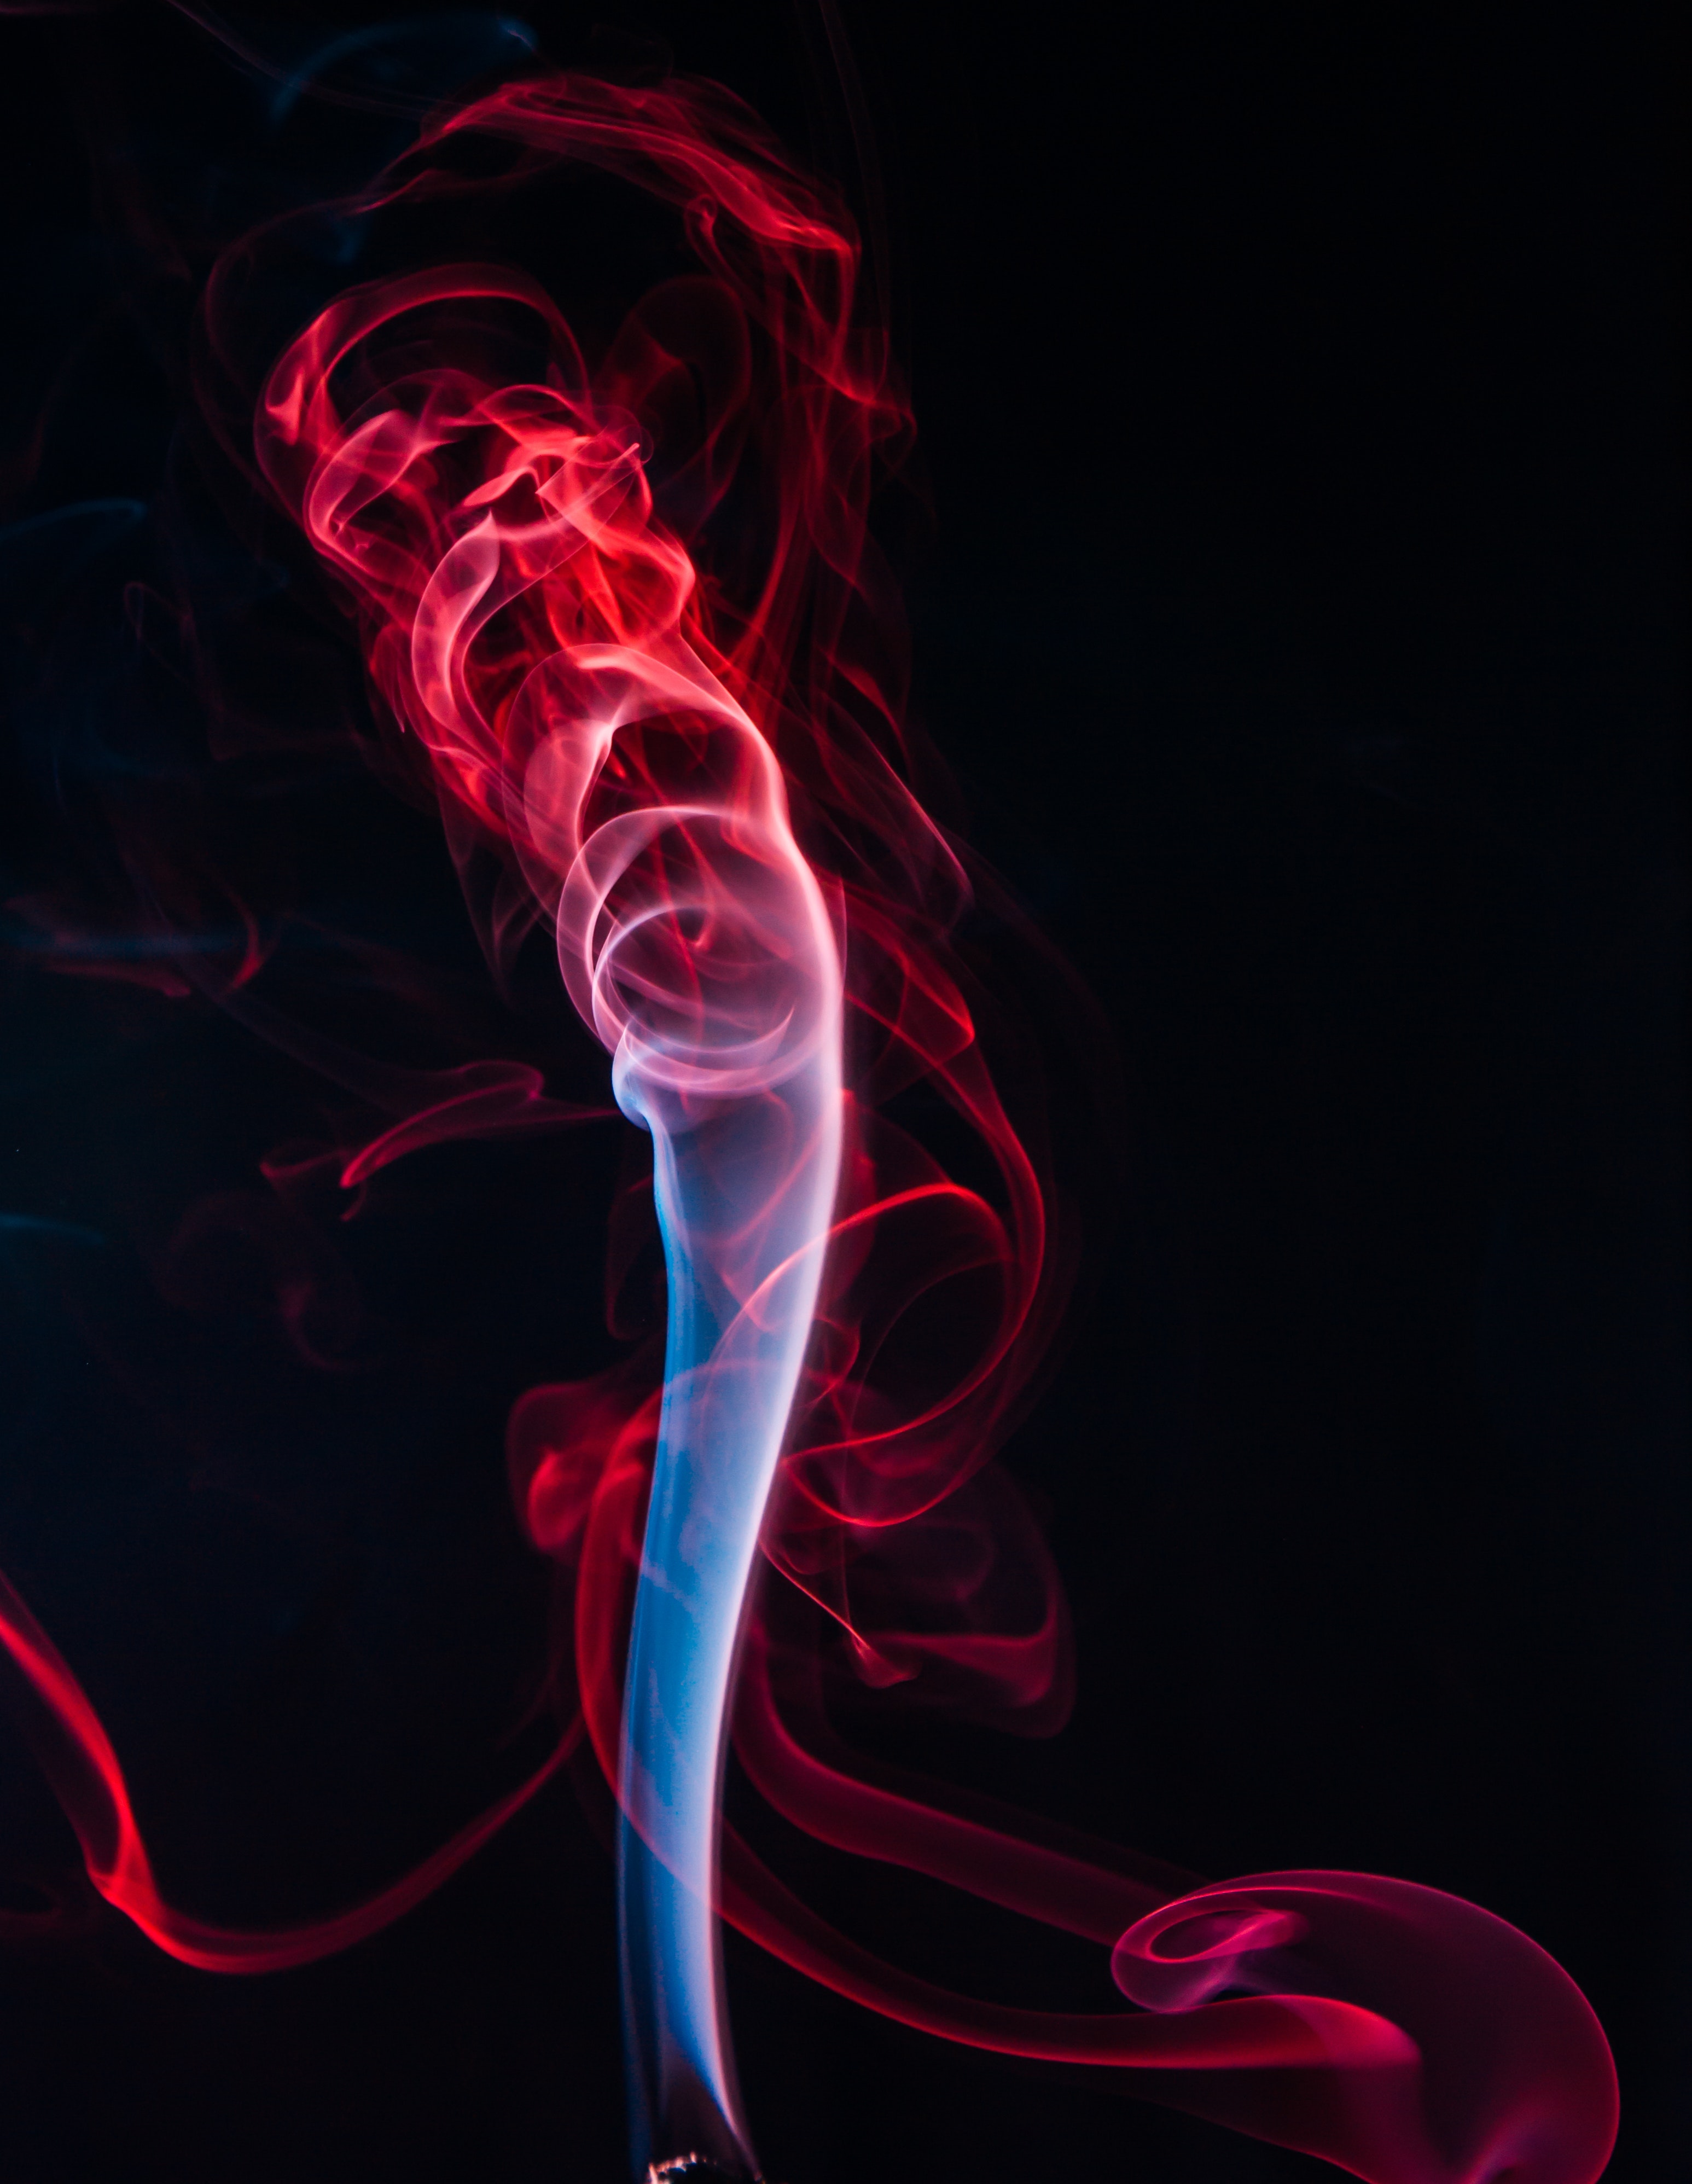 4K, FHD, UHD shroud, red, abstract, colored smoke